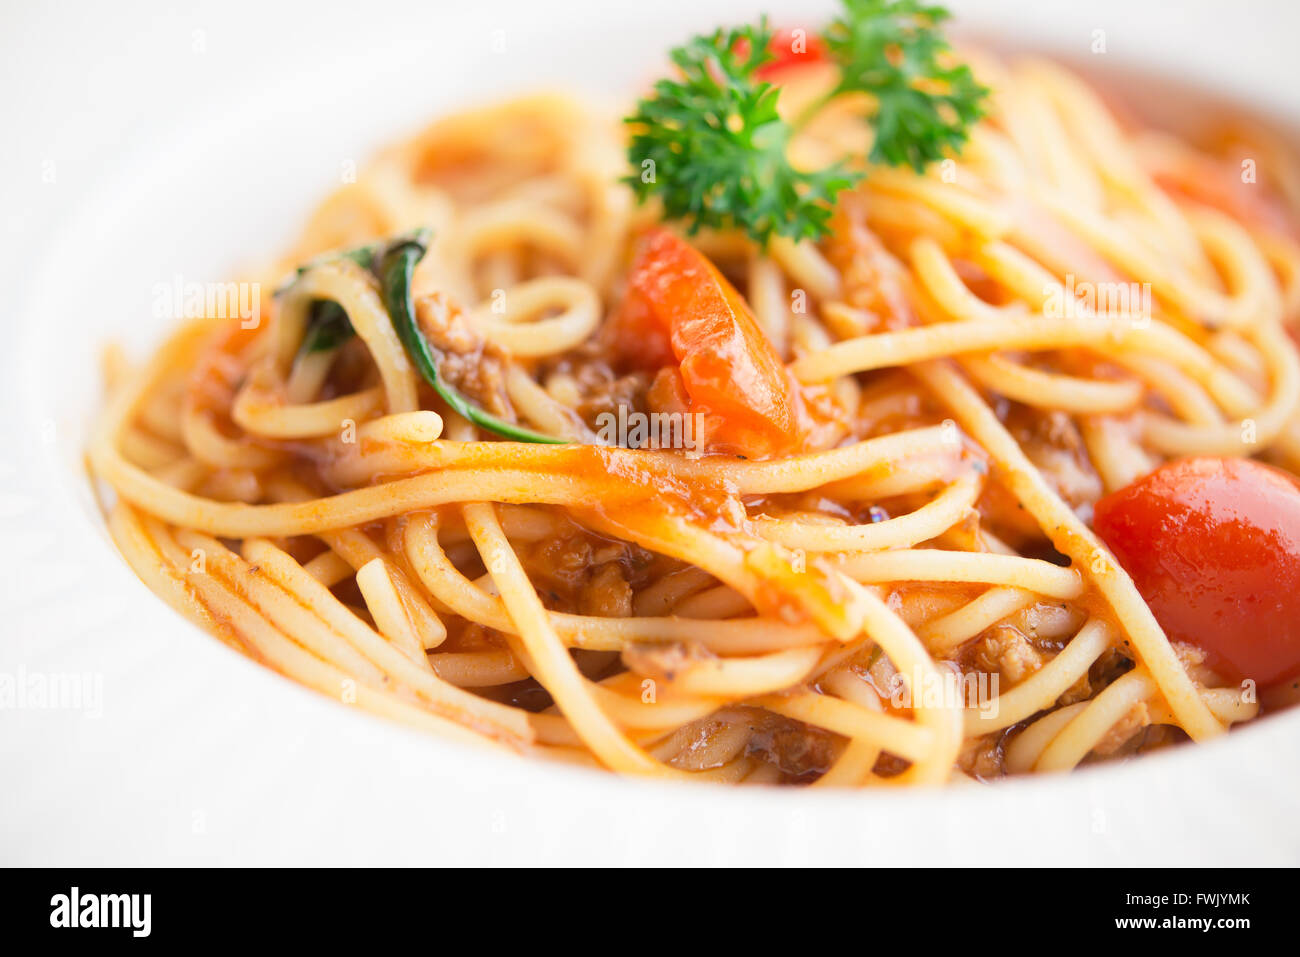 Healthy plate of Italian spaghetti topped with a tasty tomato and ground beef Stock Photo